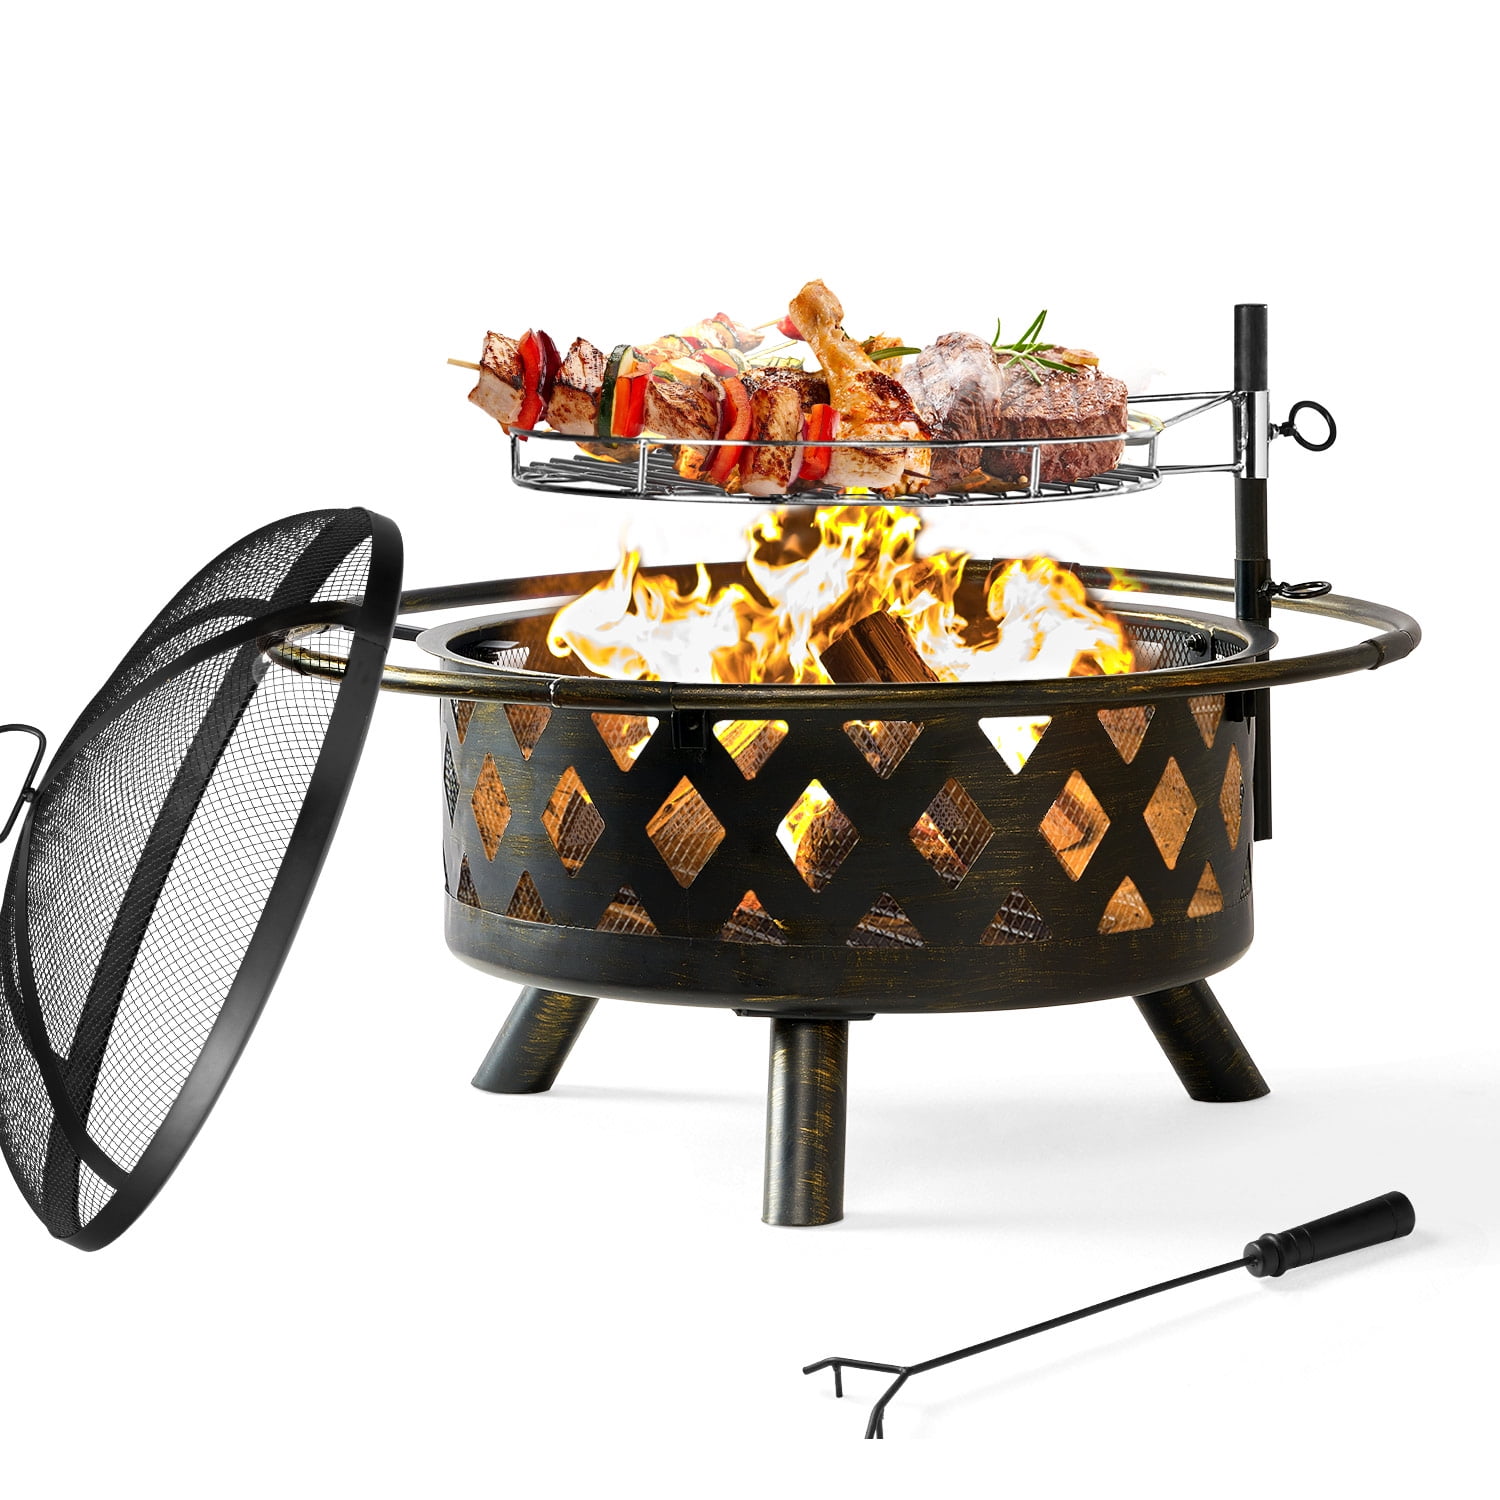 BBGrill Trinidad Fire Pit Plancha Barbecue with Wood Storage 